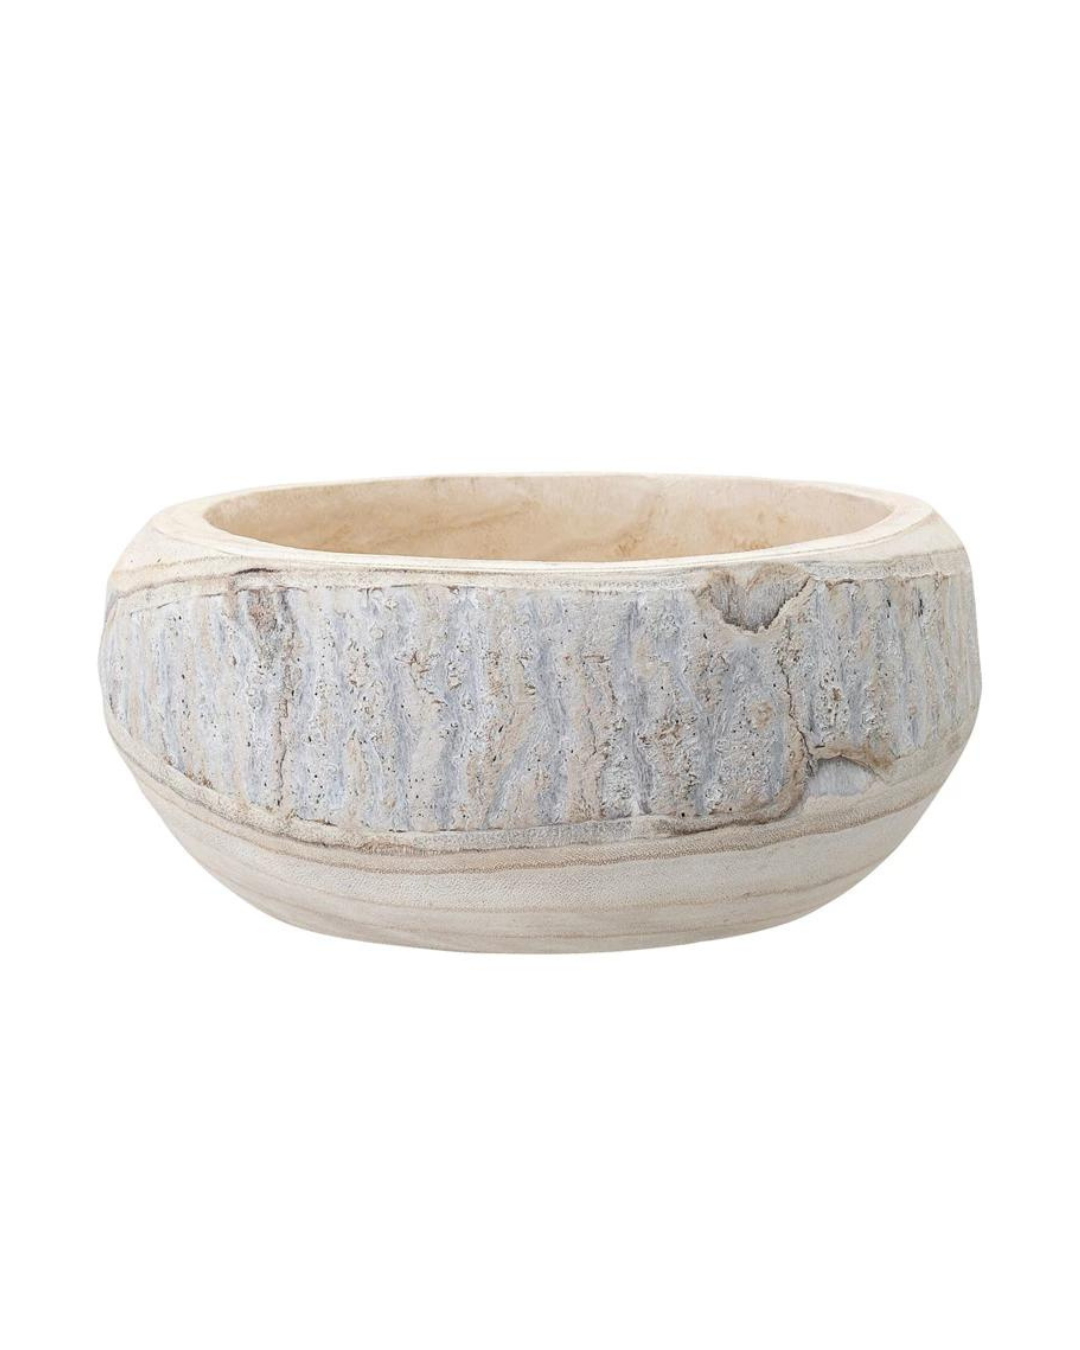 A round, shallow stone bowl with natural, textured patterns in tones of beige and gray, reminiscent of Scottsdale Arizona, isolated on a white background by Bloomingville.